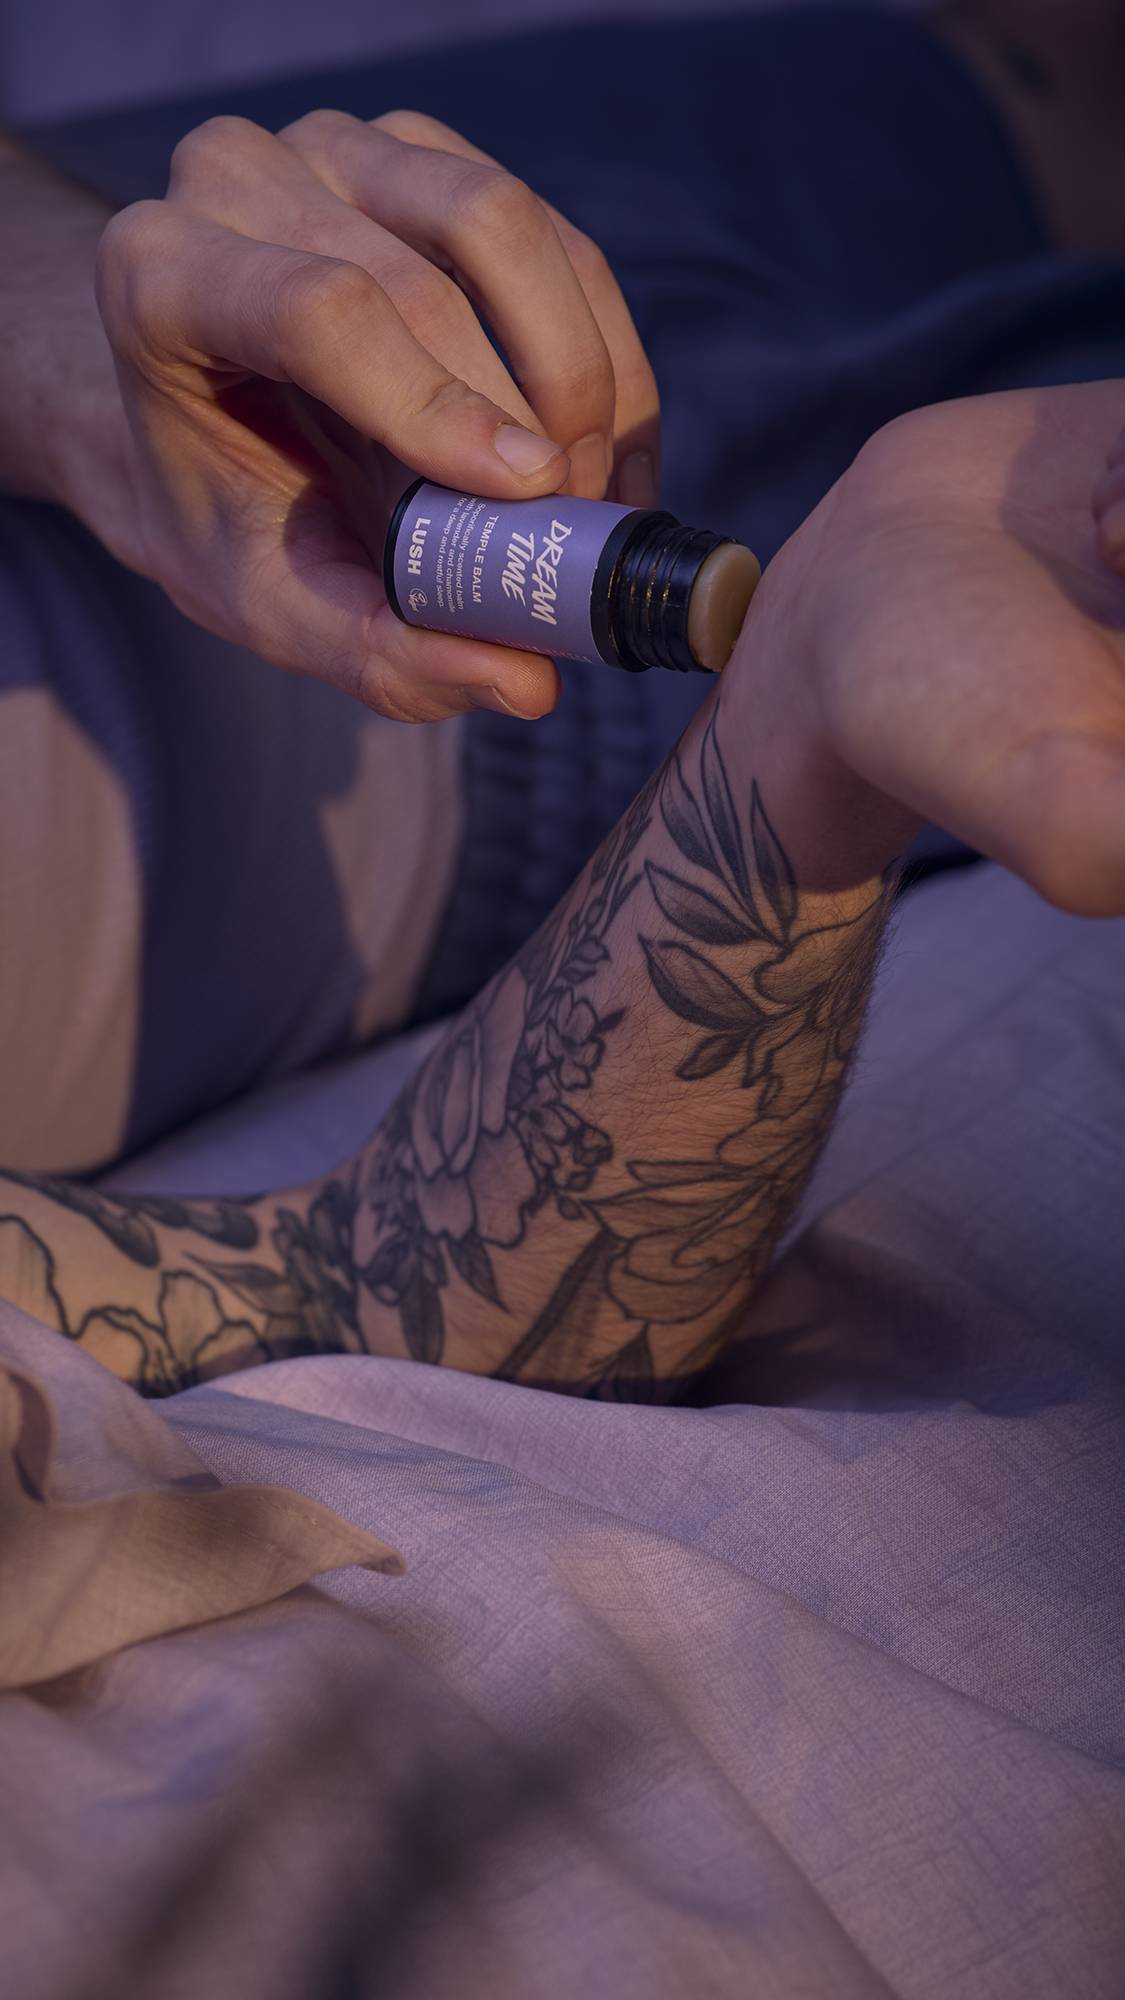 The image shows a close-up of the model's forearms and hands as they are lying in bed in lavender-purple sheets. They are gently swiping the temple balm across their wrists.